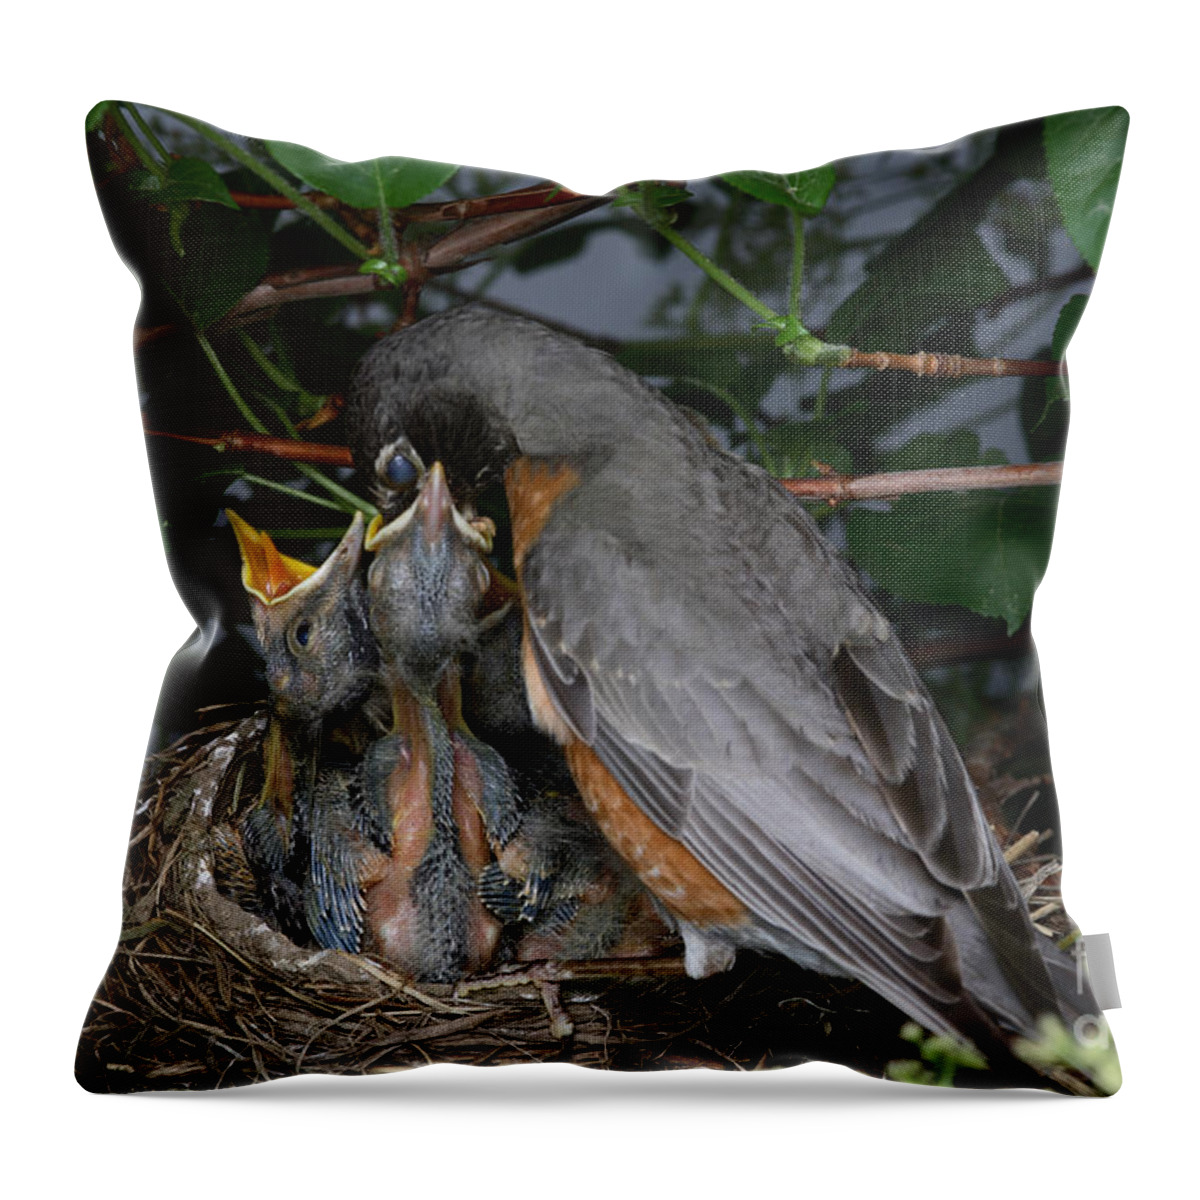 Robin Throw Pillow featuring the photograph Robin Feeding Its Young by Ted Kinsman